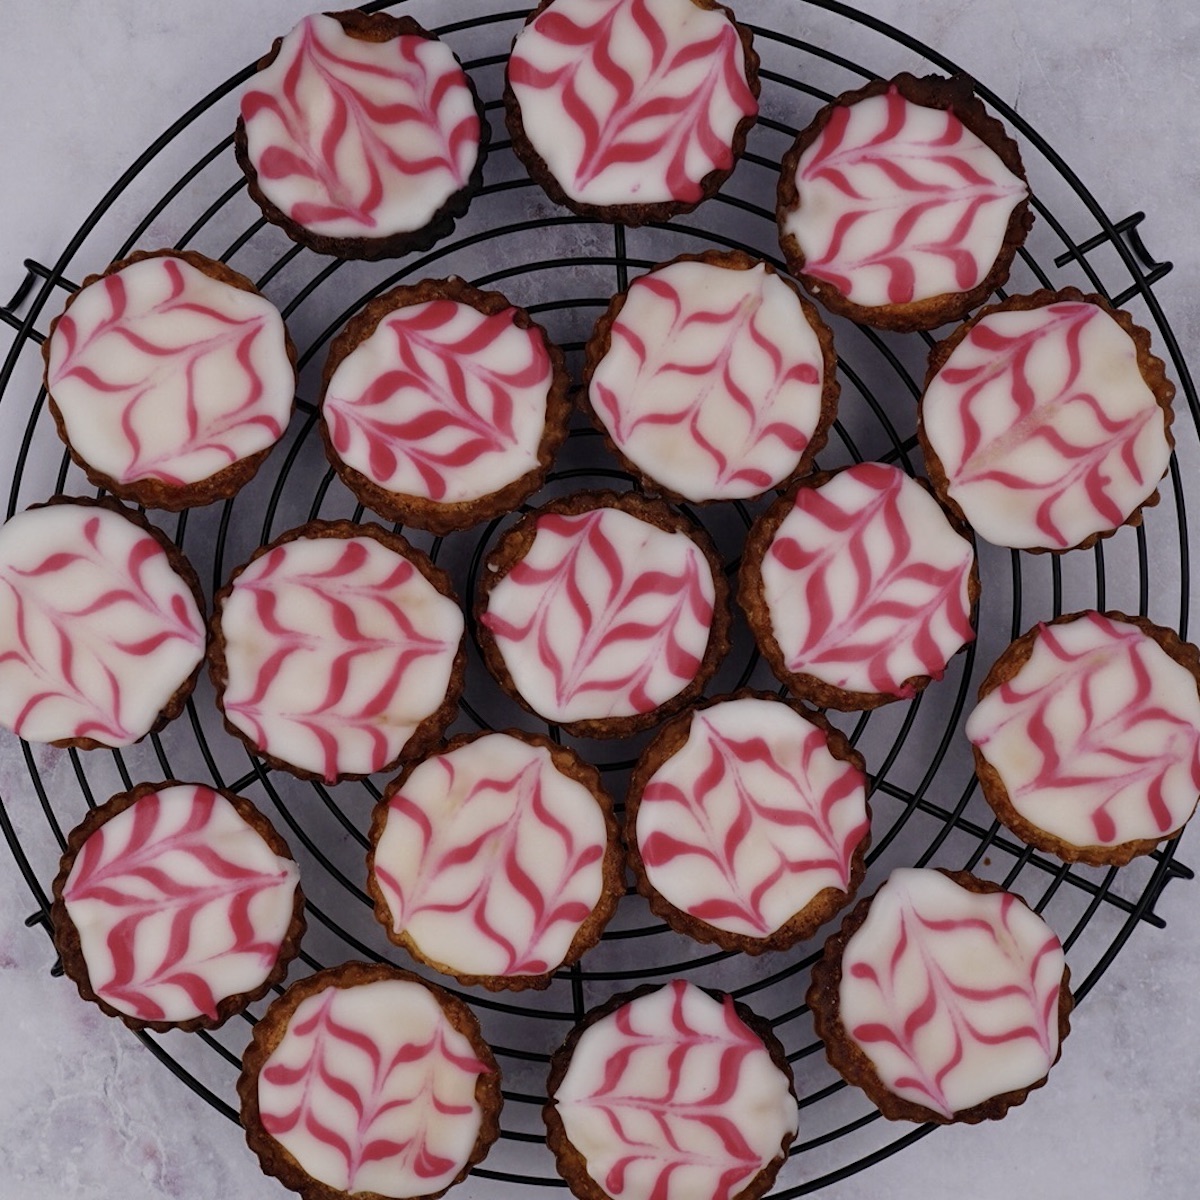 Several iced Bakewell tarts on a wire rack.